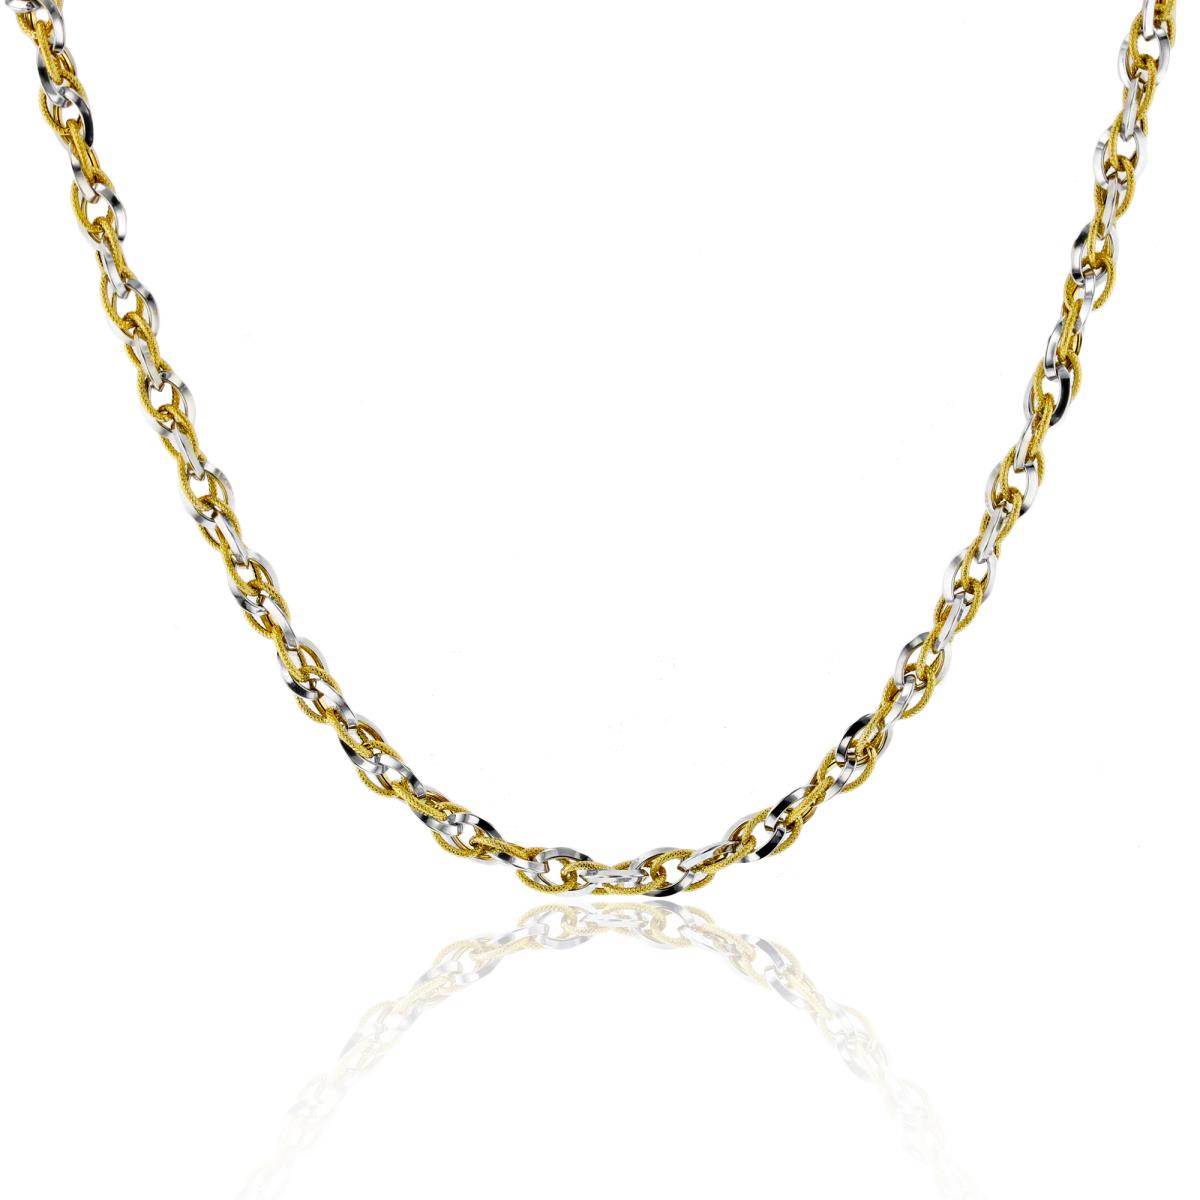 14K Two-Tone Gold Polished & Textured Triple Oval Linked Italian 19"Necklace